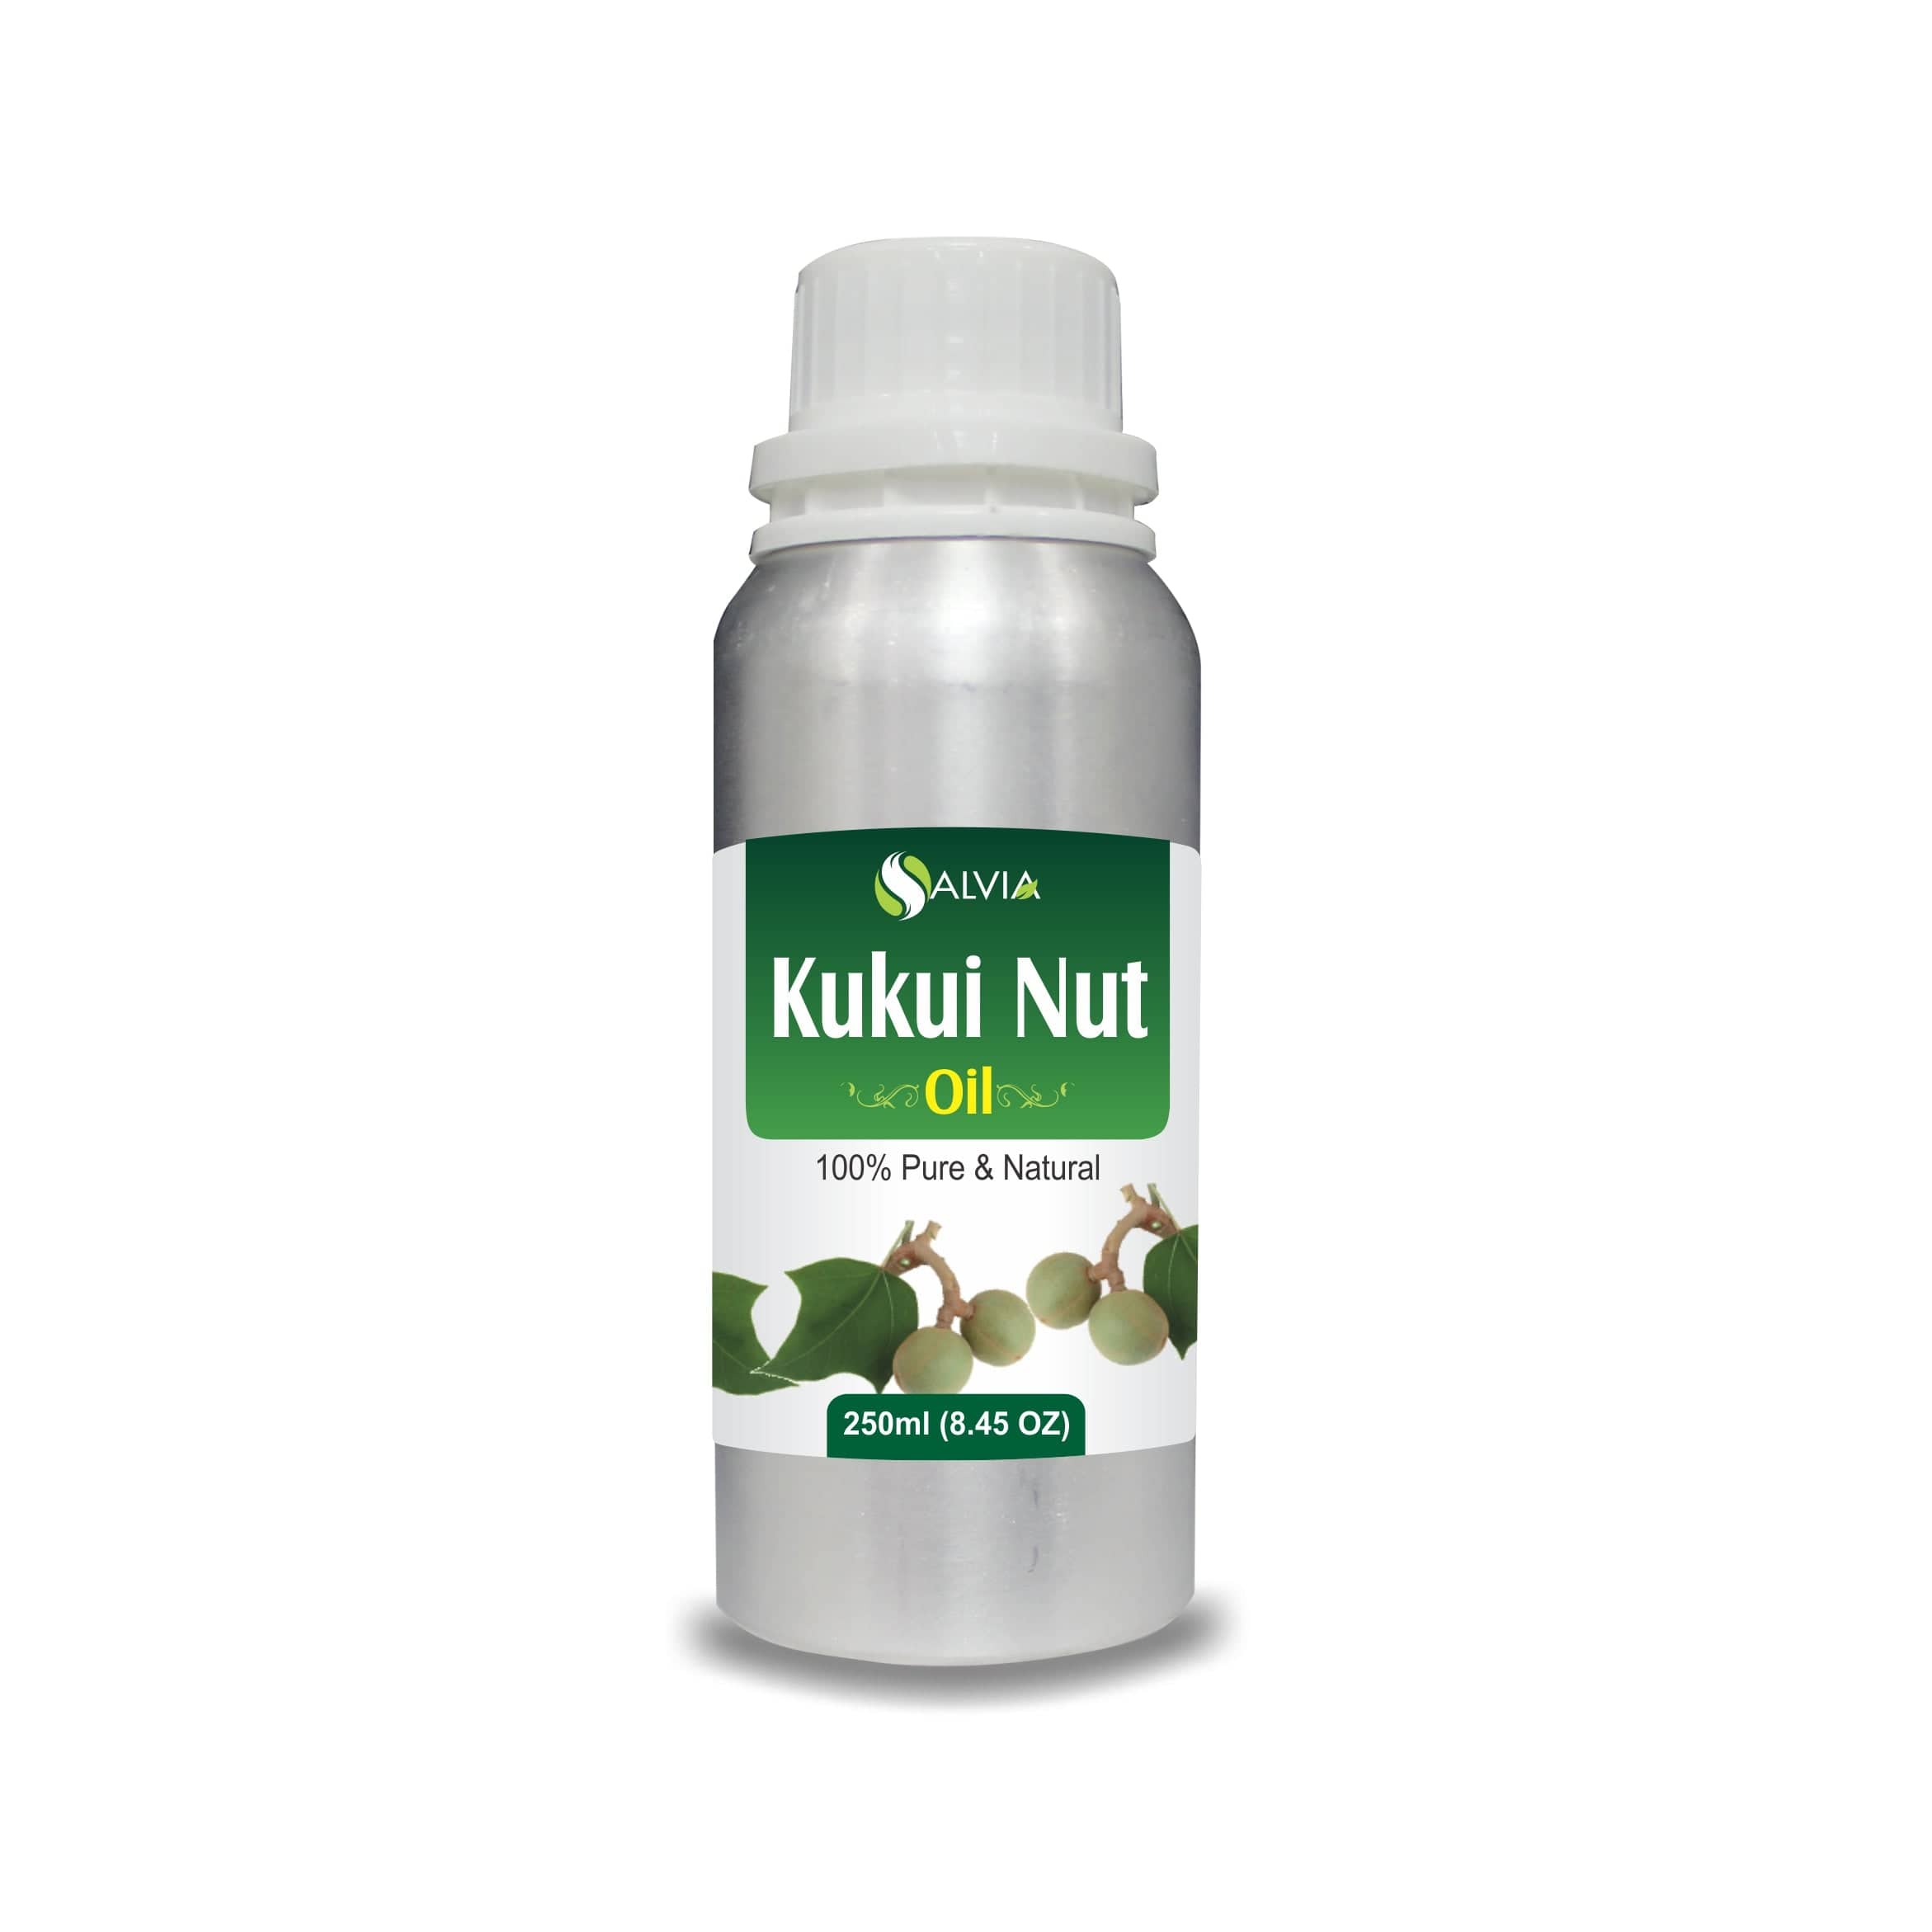 Salvia Natural Carrier Oils,Anti Ageing,Anti-ageing Oil 250ml Kukui Nut (Aleurites Moluccans) Oil 100% Natural Pure Carrier Oil Moistures & Hydrates Skin, Anti-Aging Properties, Collagen Production & More